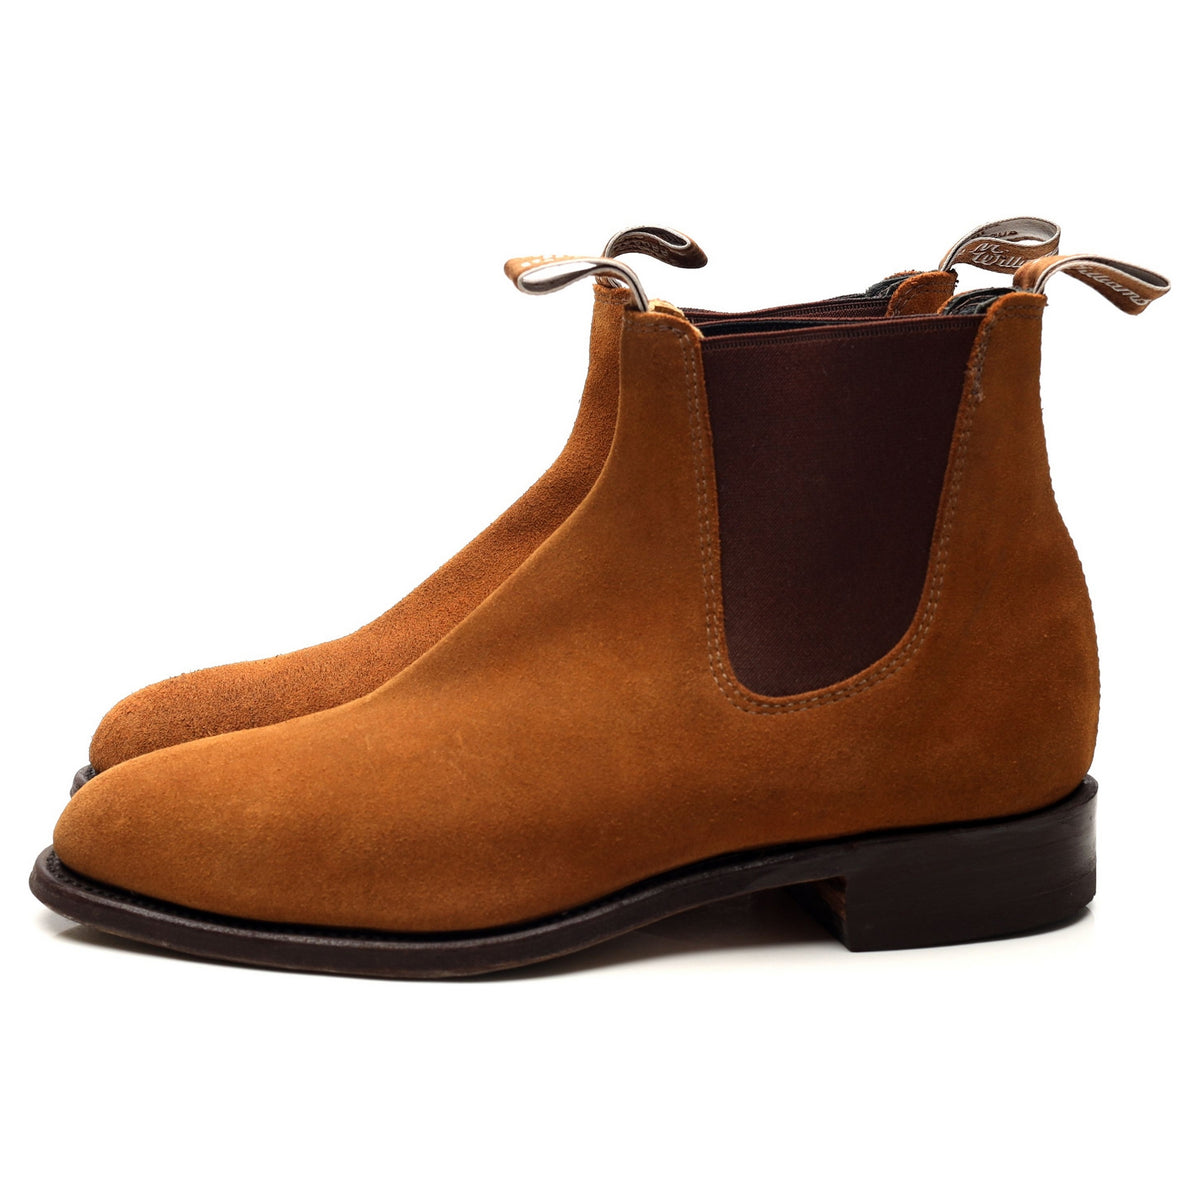 Tan Brown Suede Chelsea Boots UK 6 G